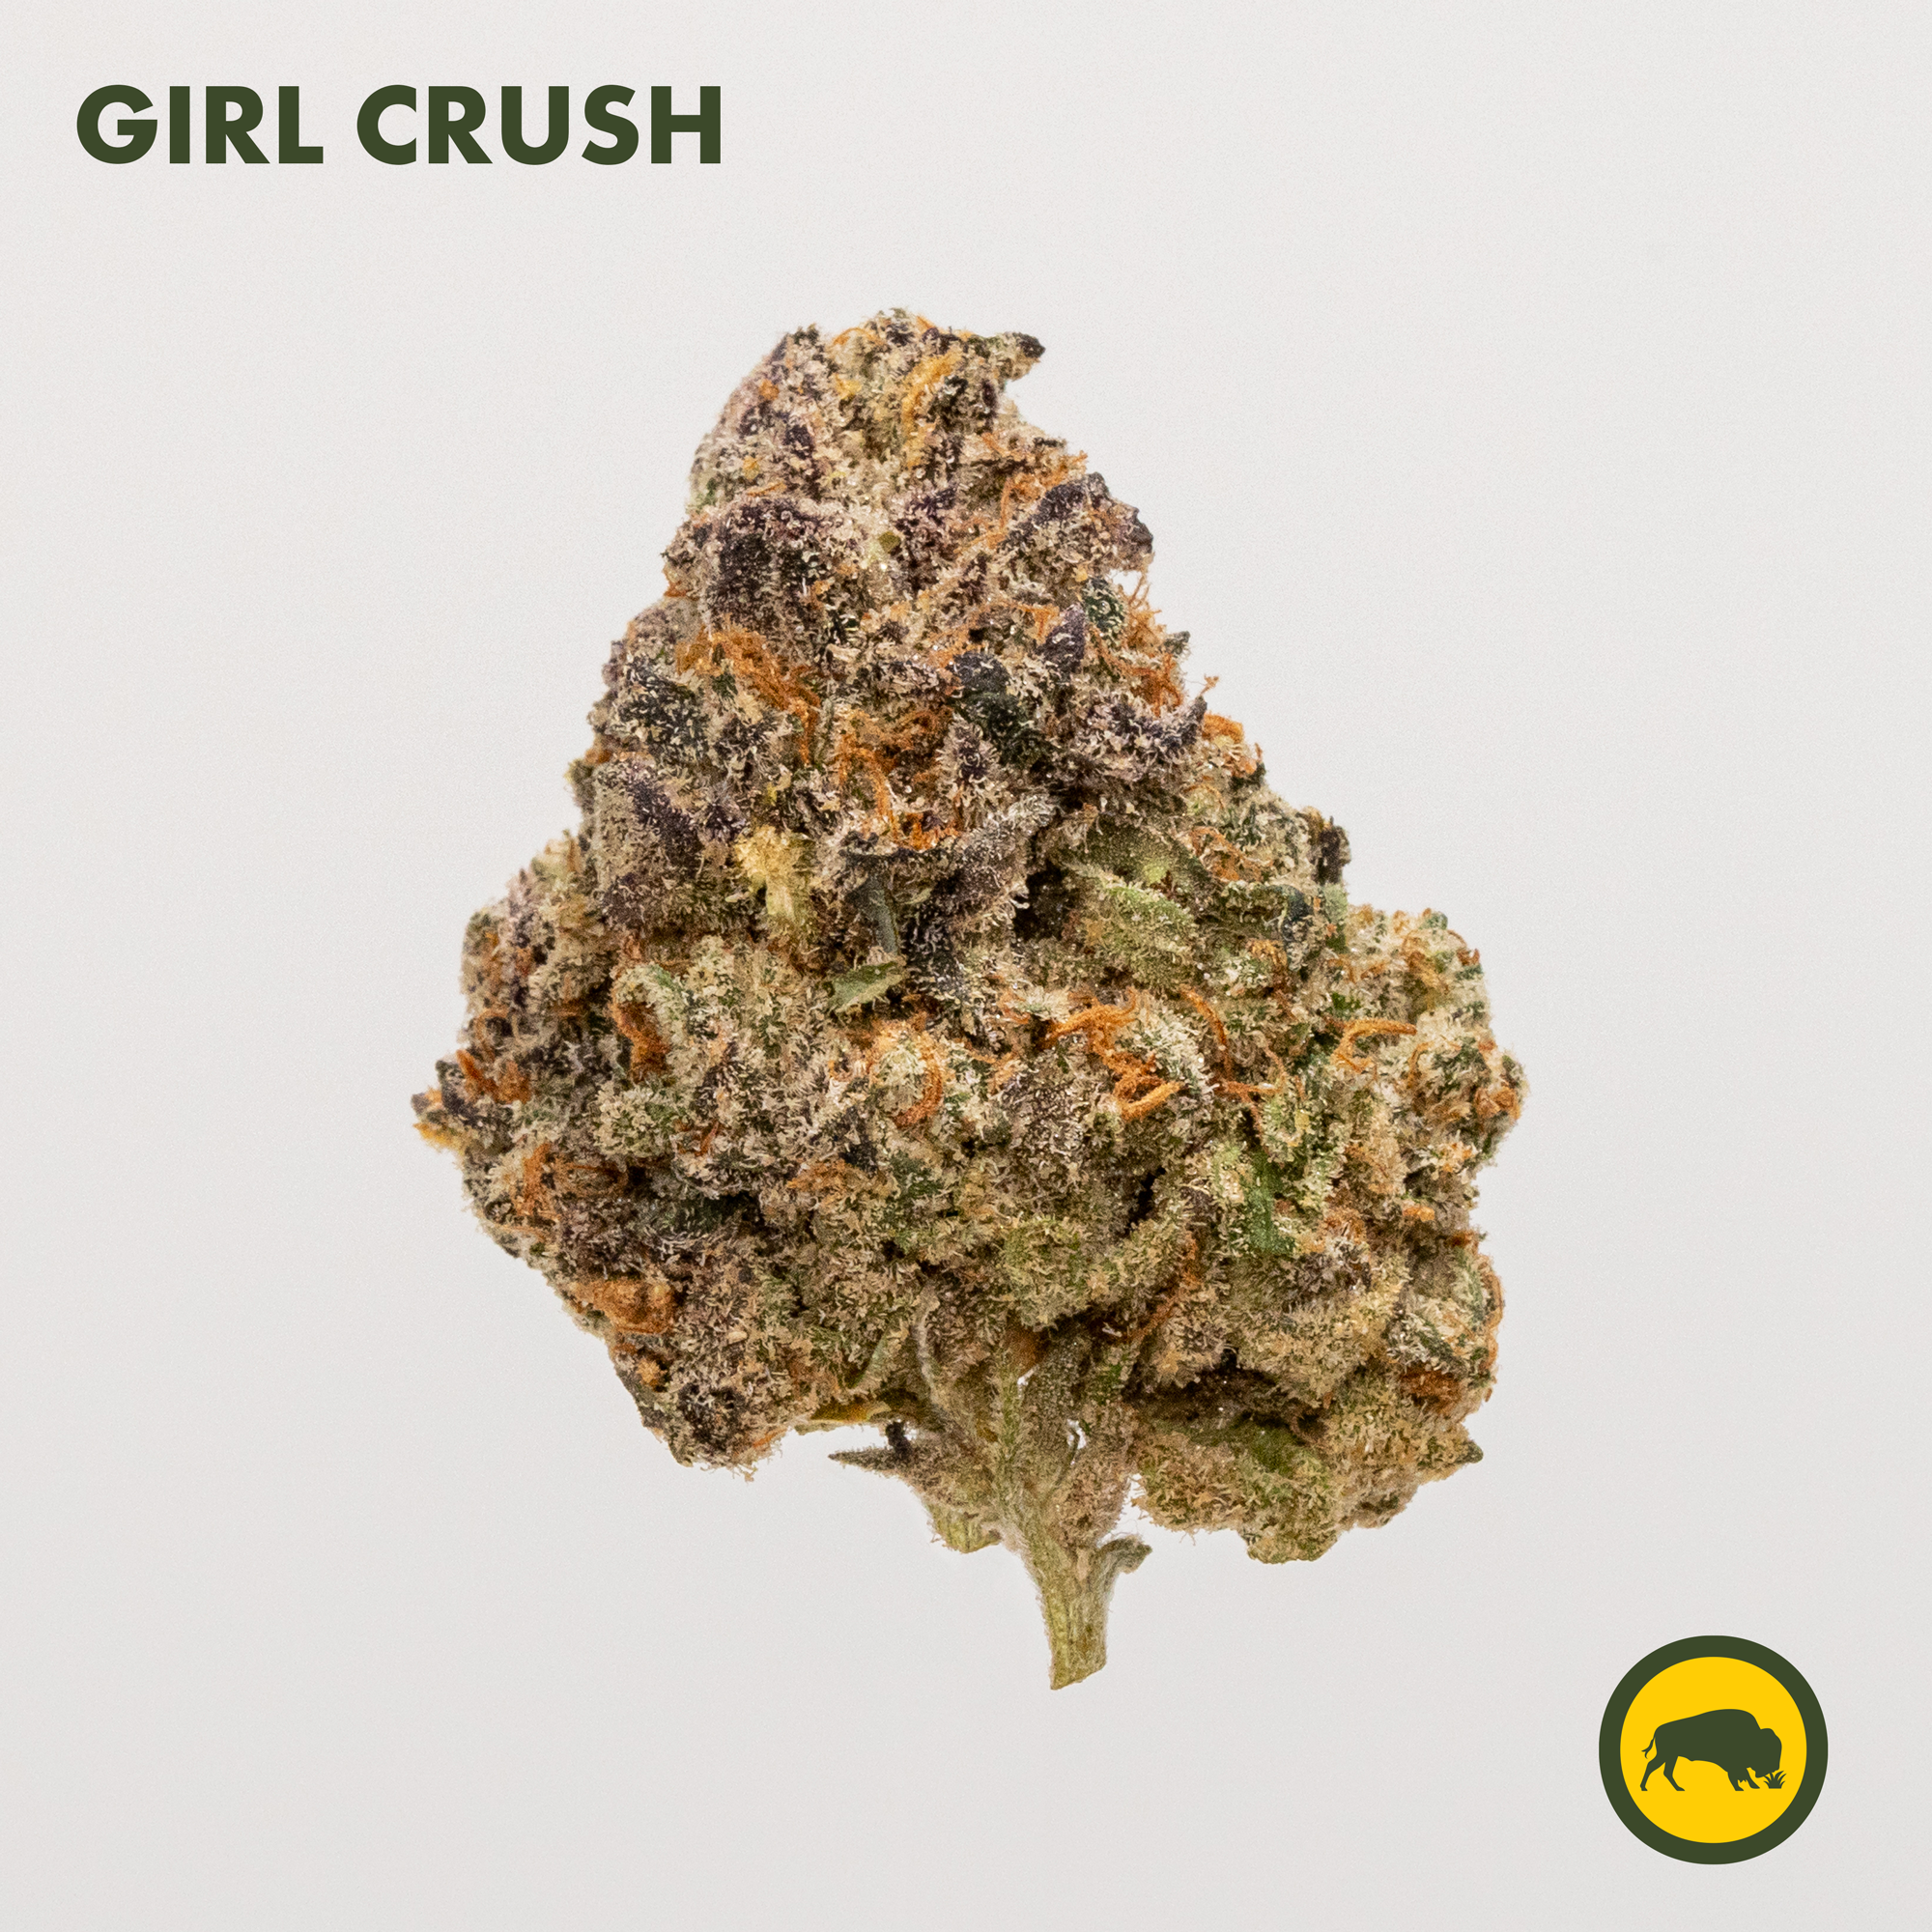 Beforeland Farm's Girl Crush is a 50/50 hybrid that is part of the Bison Botanics Select line of cannabis flower. It tested at 20.92% THC. 